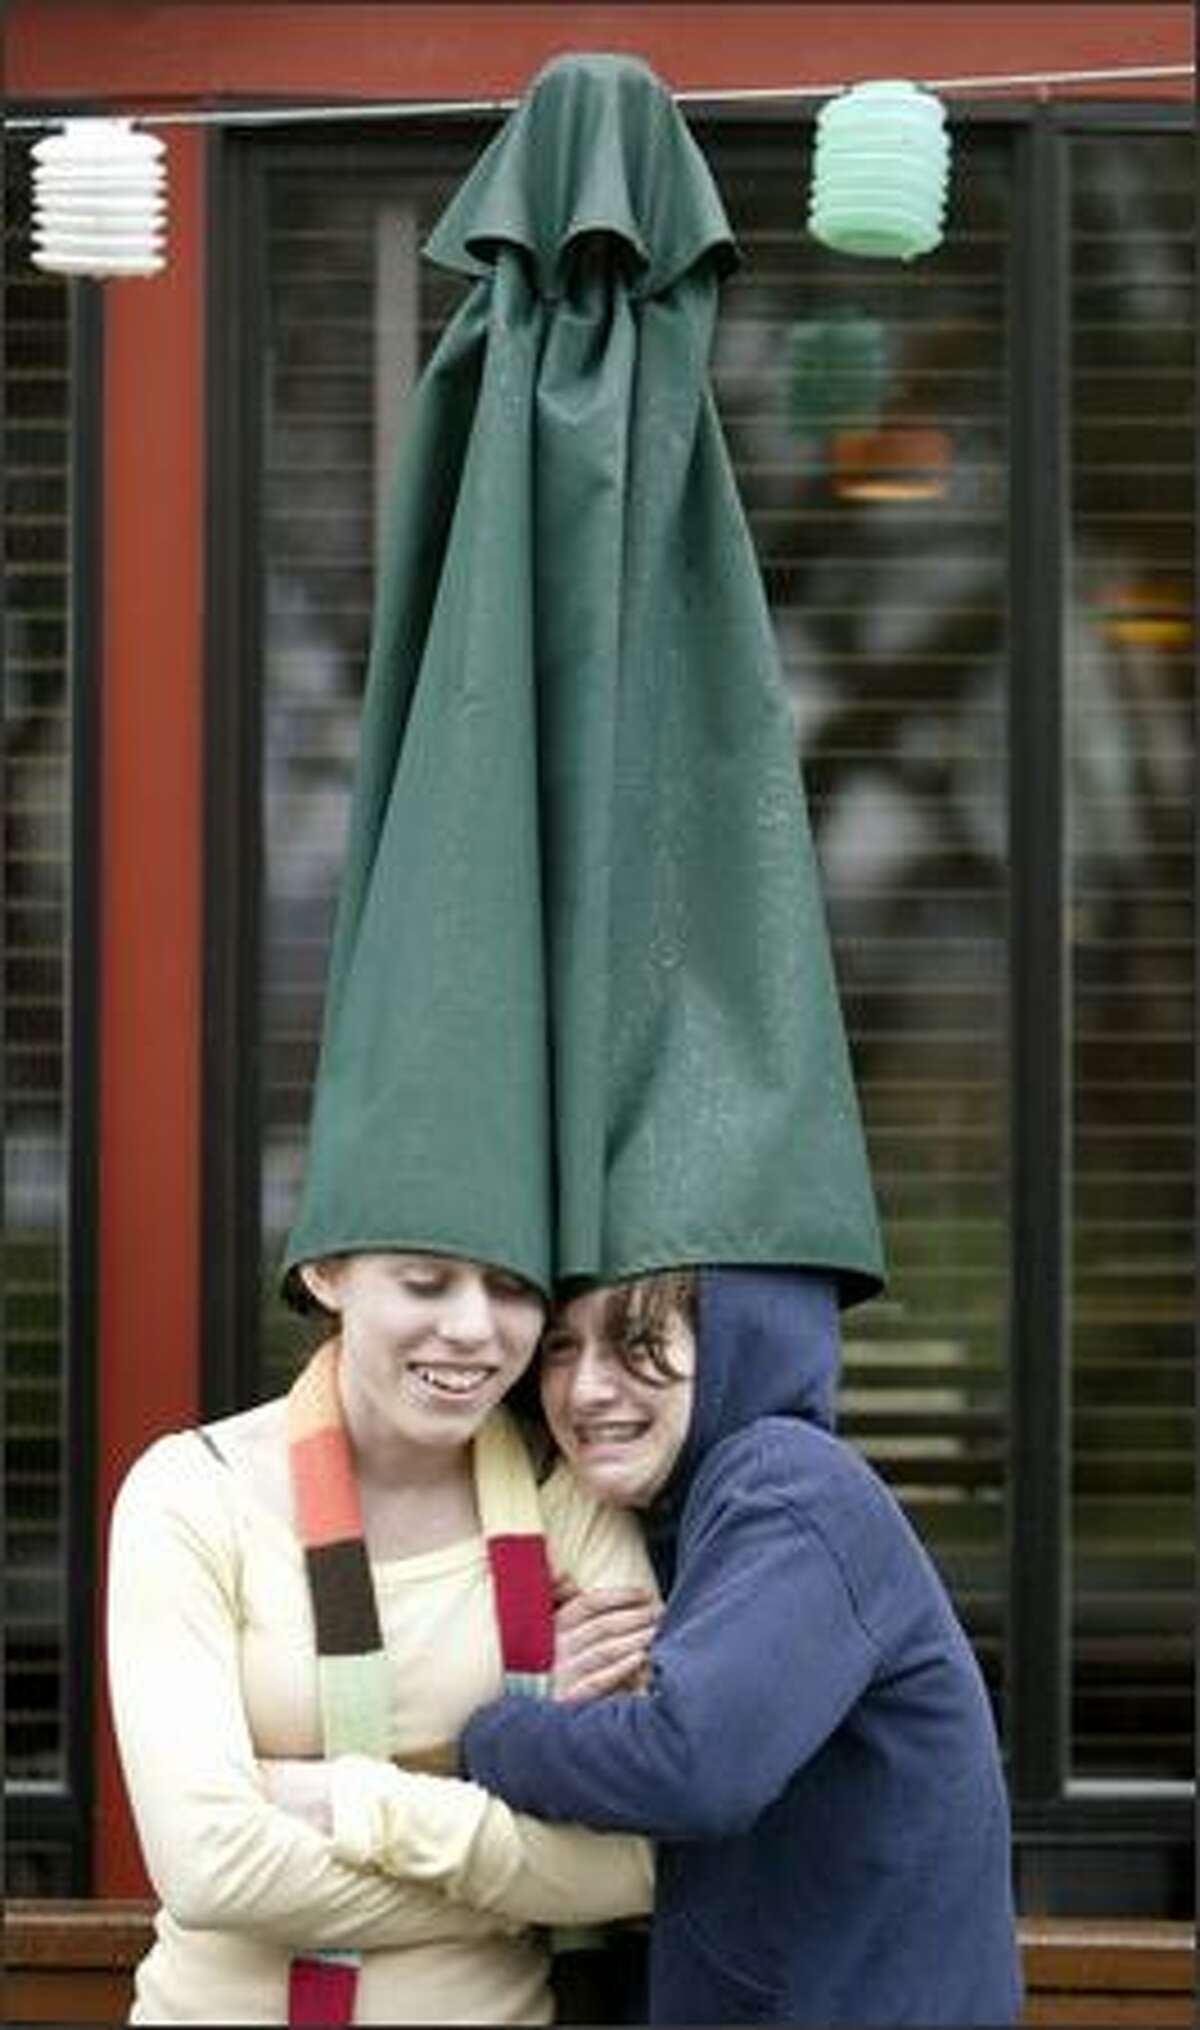 Alea Christiansen, left, and Kate Baron, both eighth-graders at Billings Middle School, get a little creative as they use a patio umbrella to try to keep dry while waiting to enter the Green Lake Bar & Grill in Seattle on Wednesday. The school, in a partnership with the restaurant, exchanges weekly hot meals for students for parking space for the restaurant’s patrons. Today, that rain will be back.